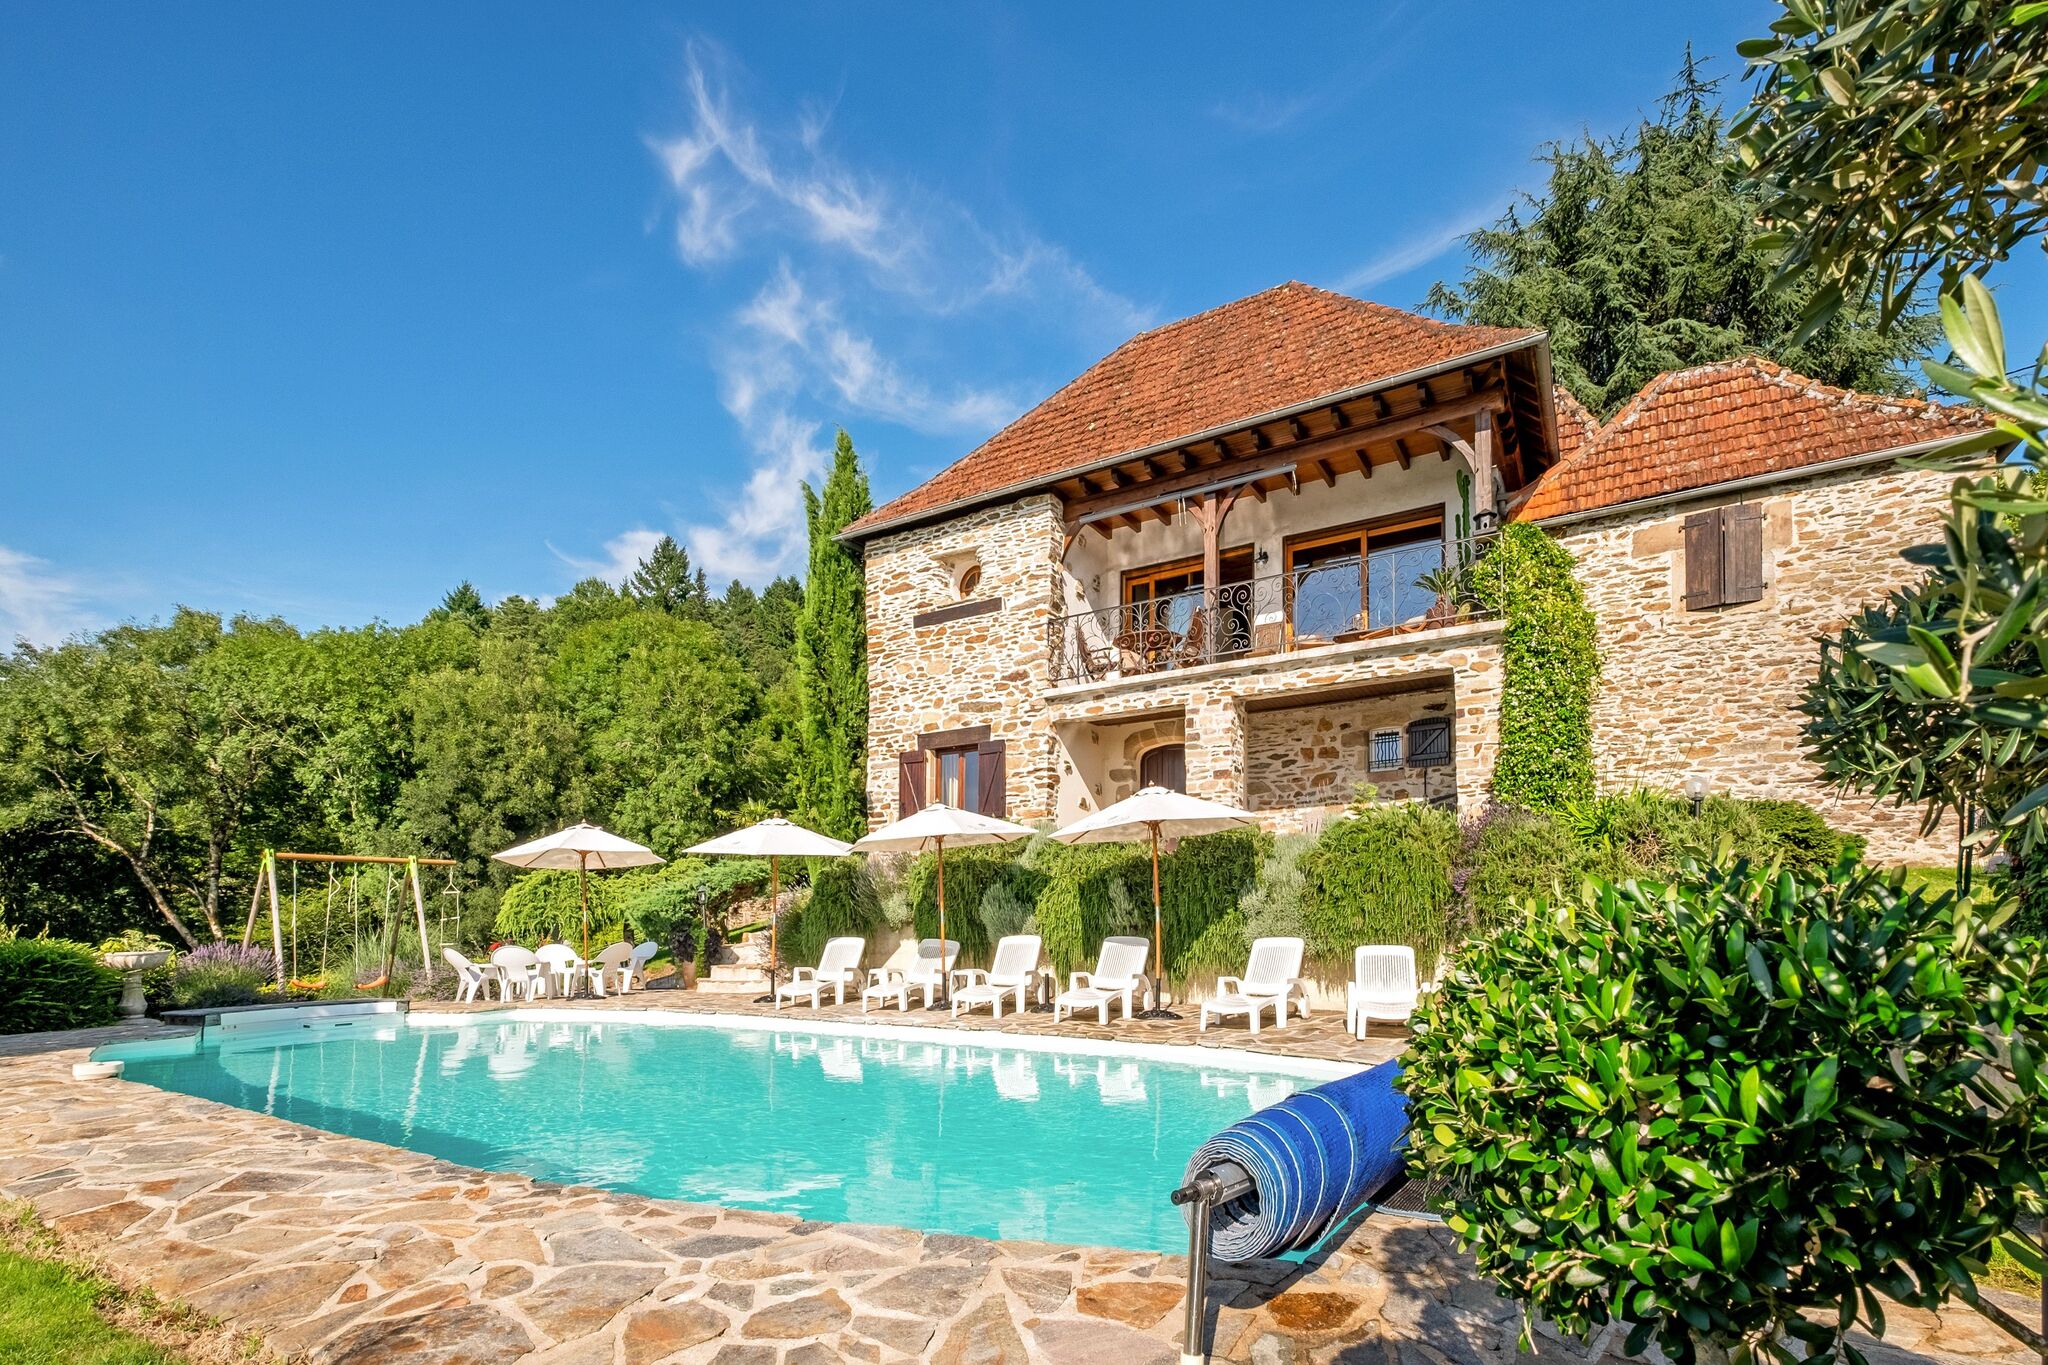 Plush holiday home in Altillac with a private swimming pool